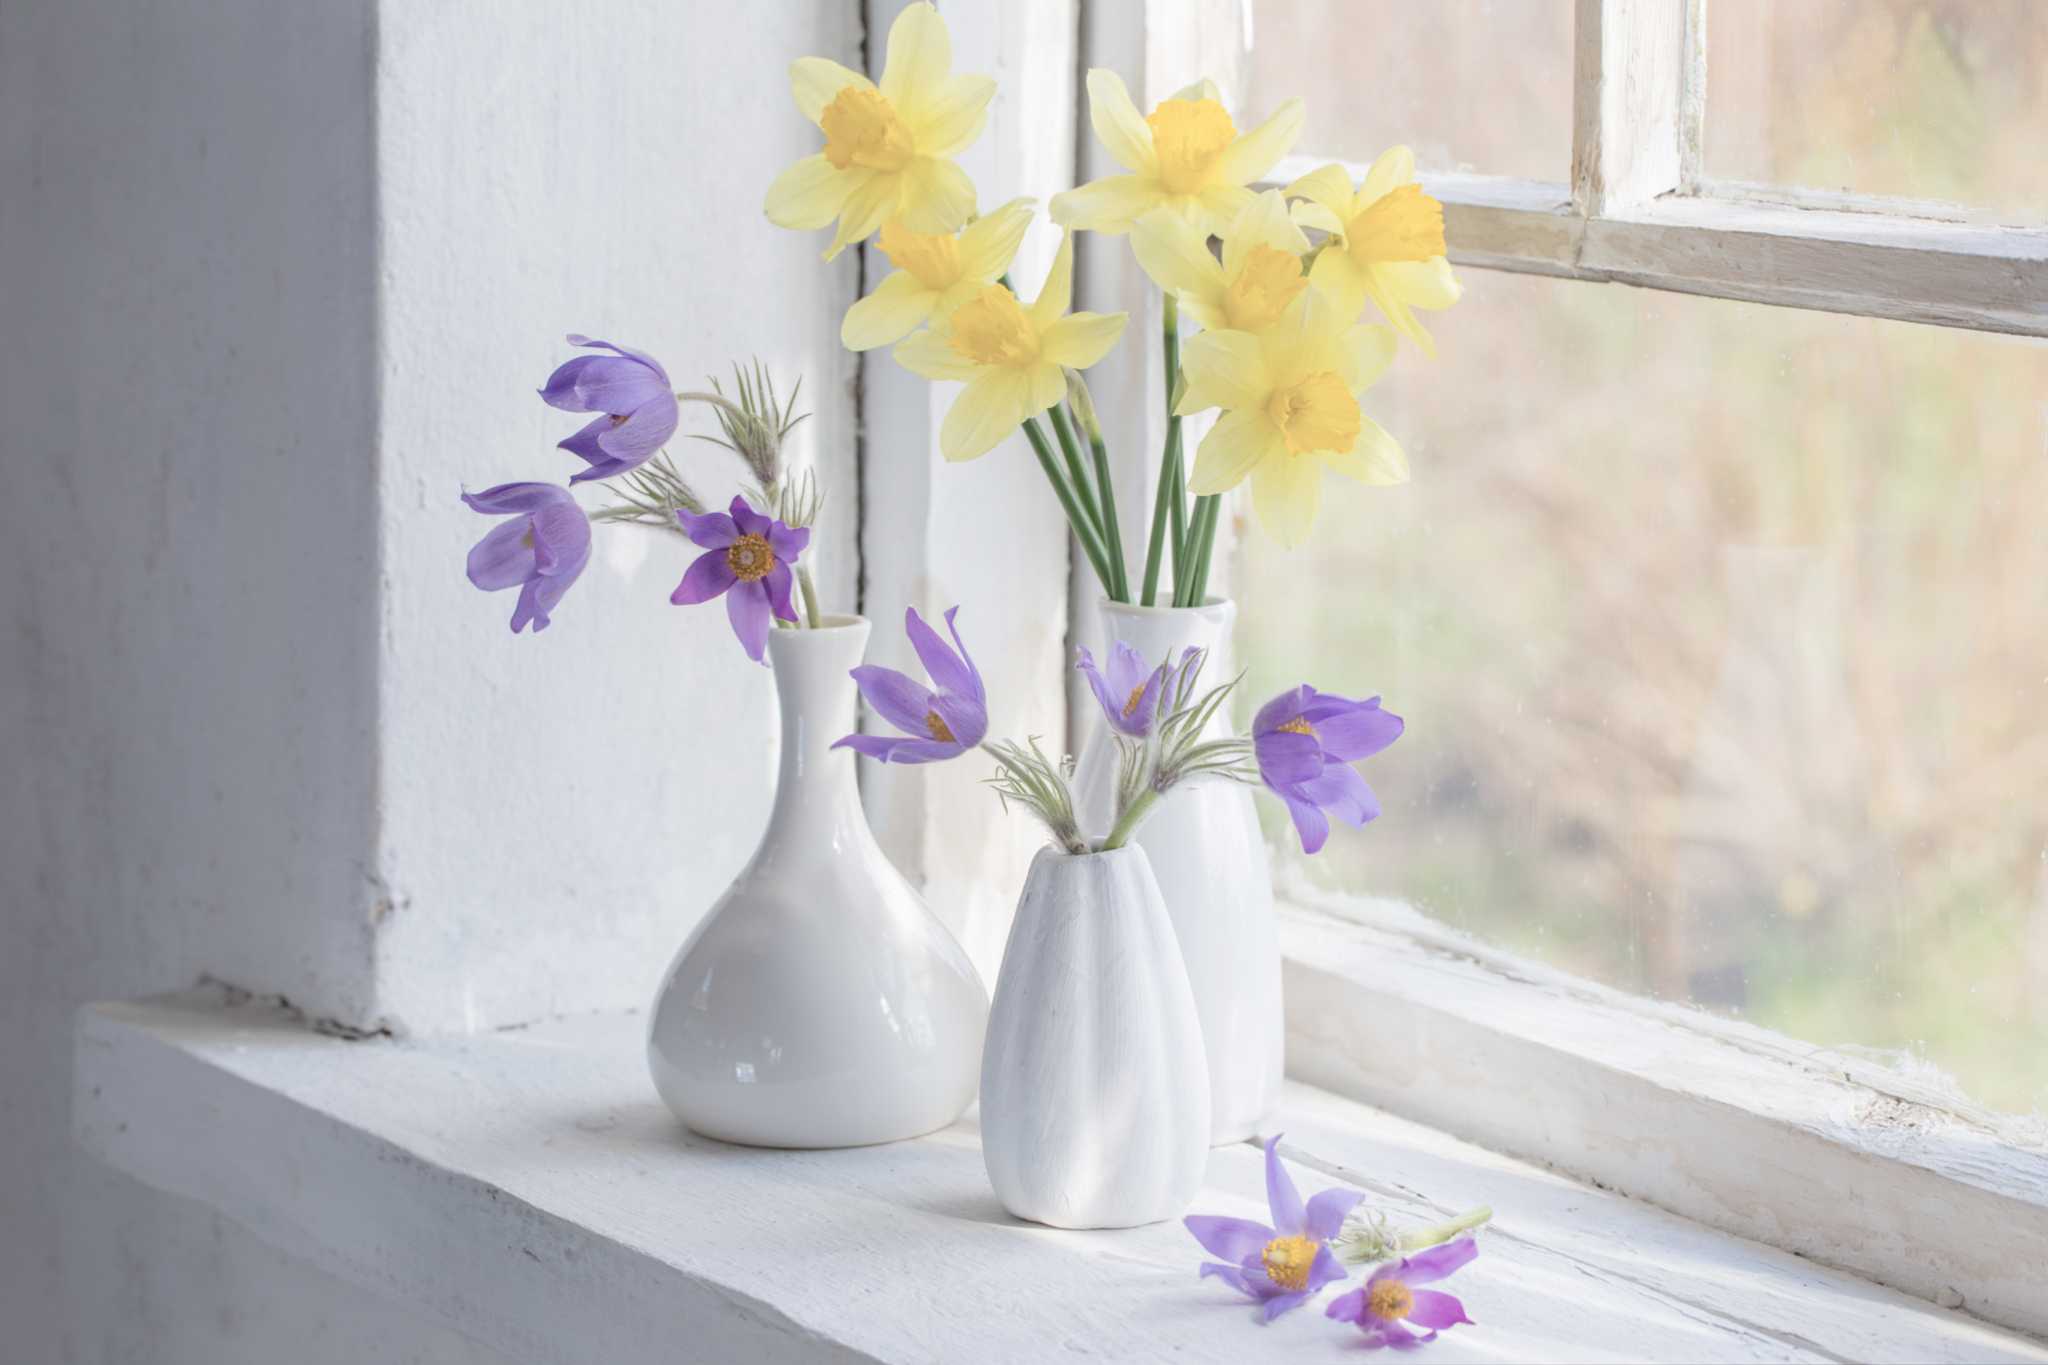 How to Care for Daffodils Indoors